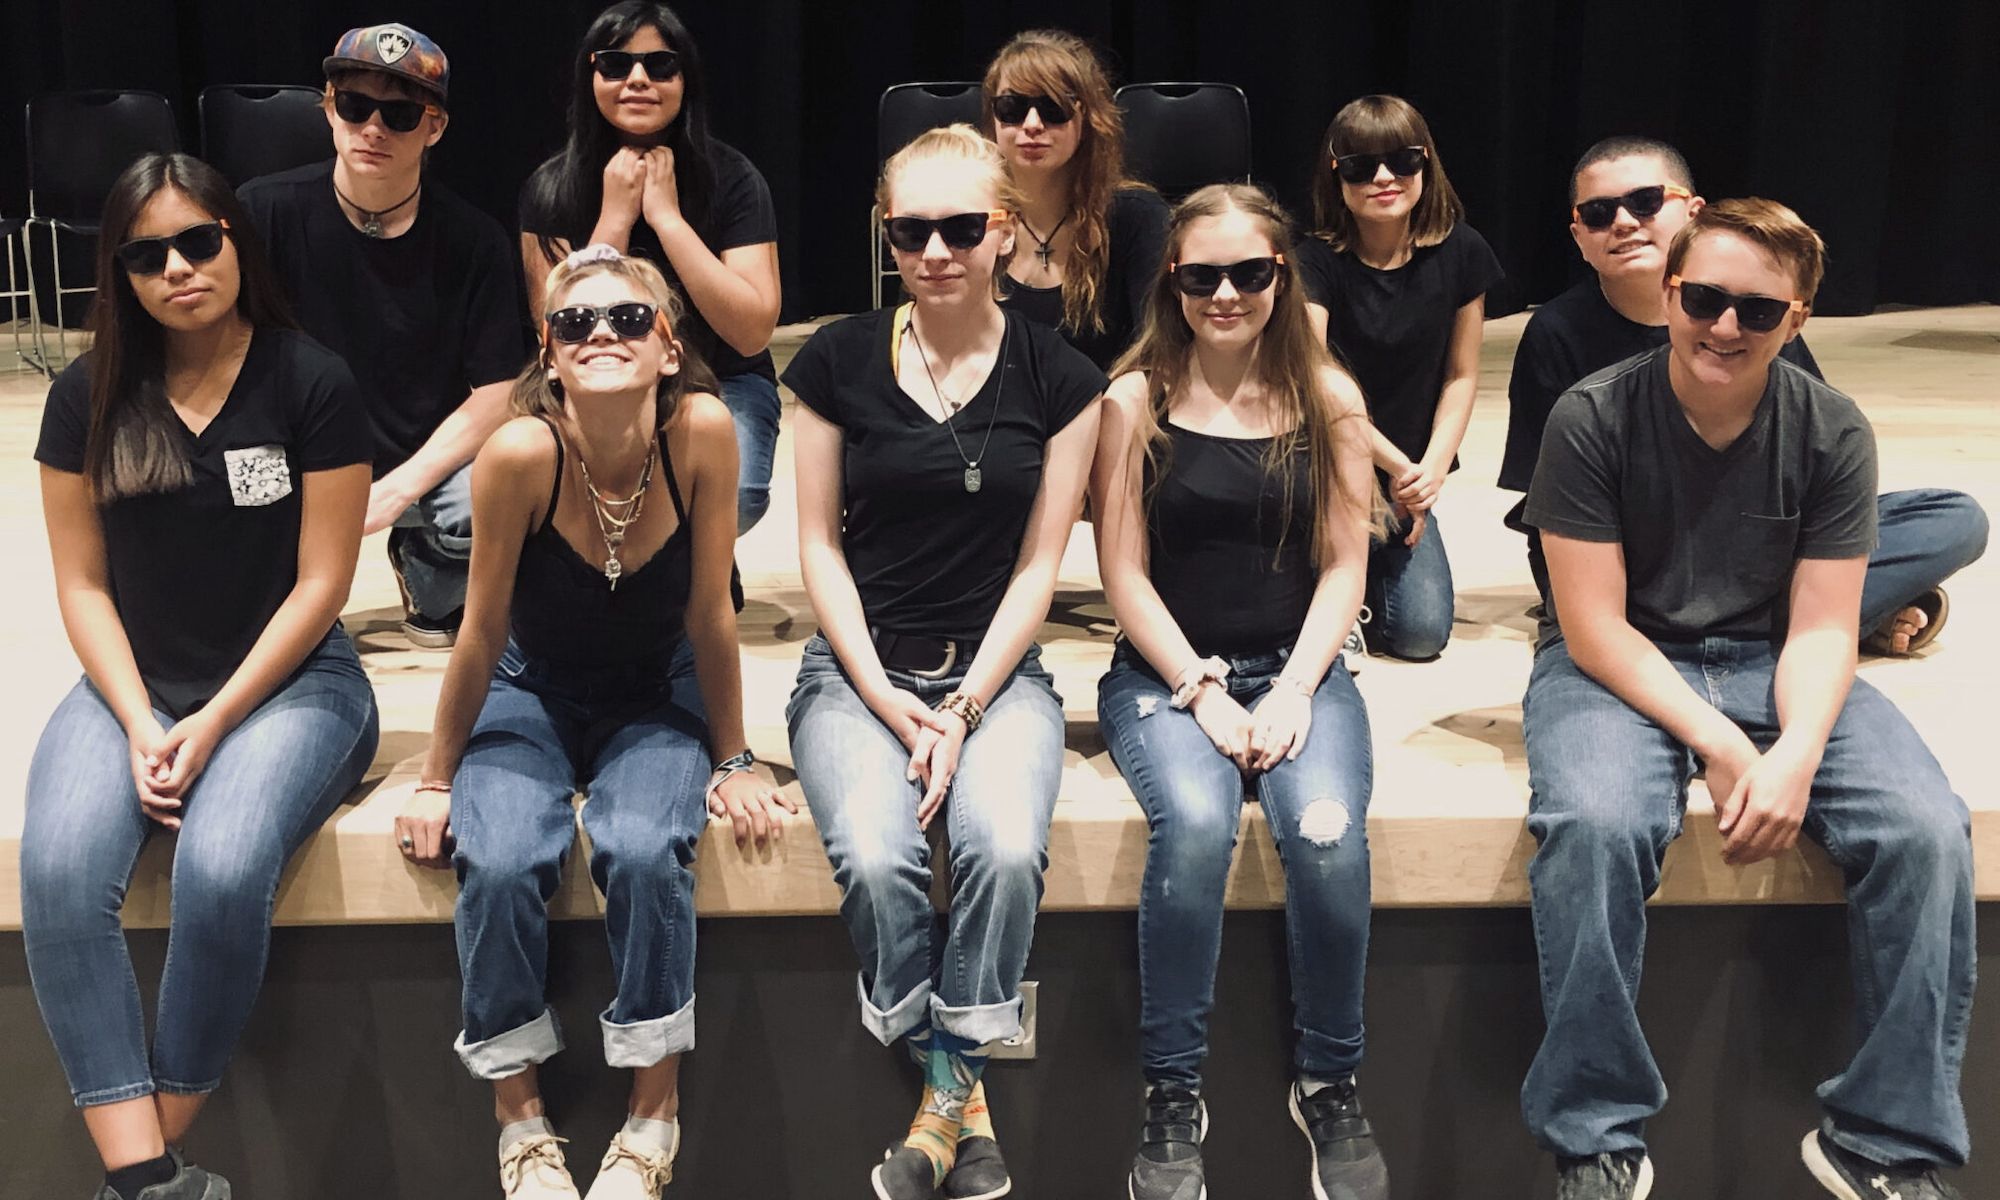 Teens in black t-shirts, jeans, and sunglasses sit on the stage.